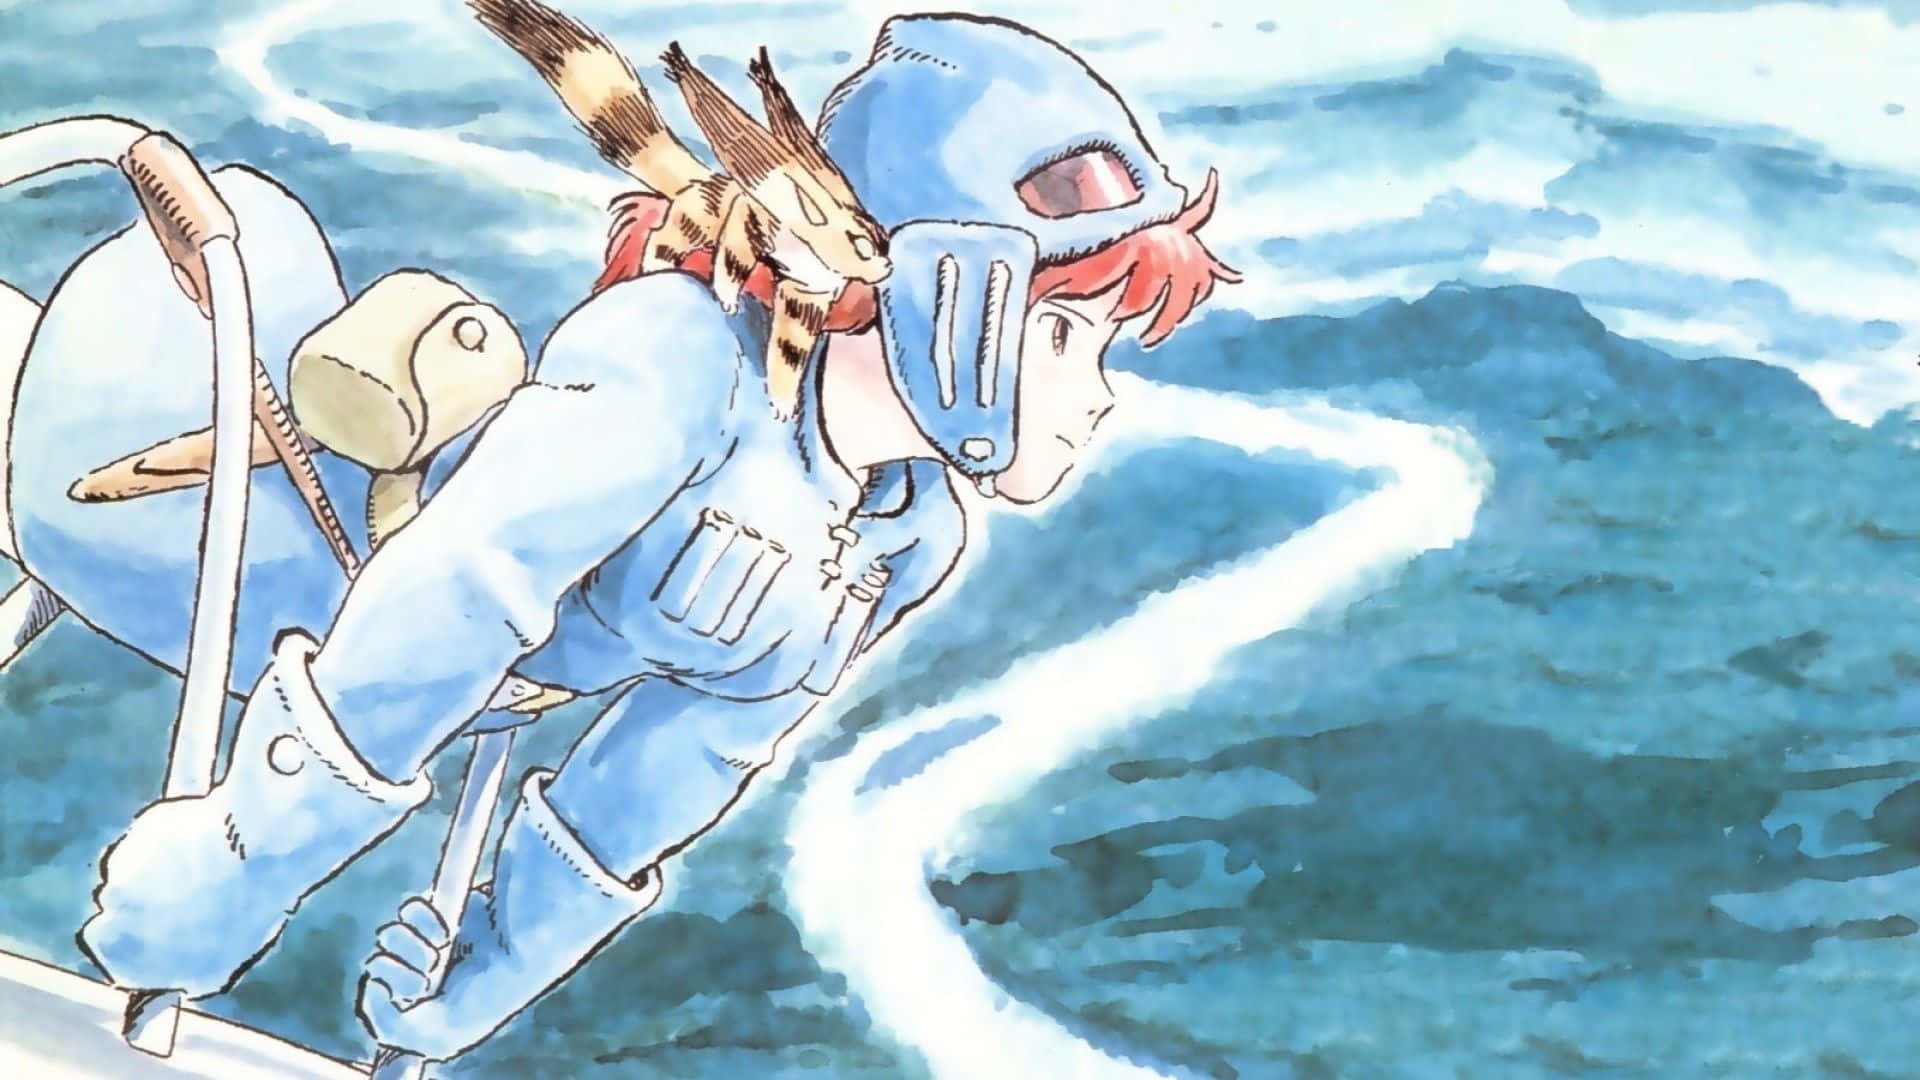 Nausicaä of the Valley of the Wind - Adventurous Journey through a Fantasy World Wallpaper